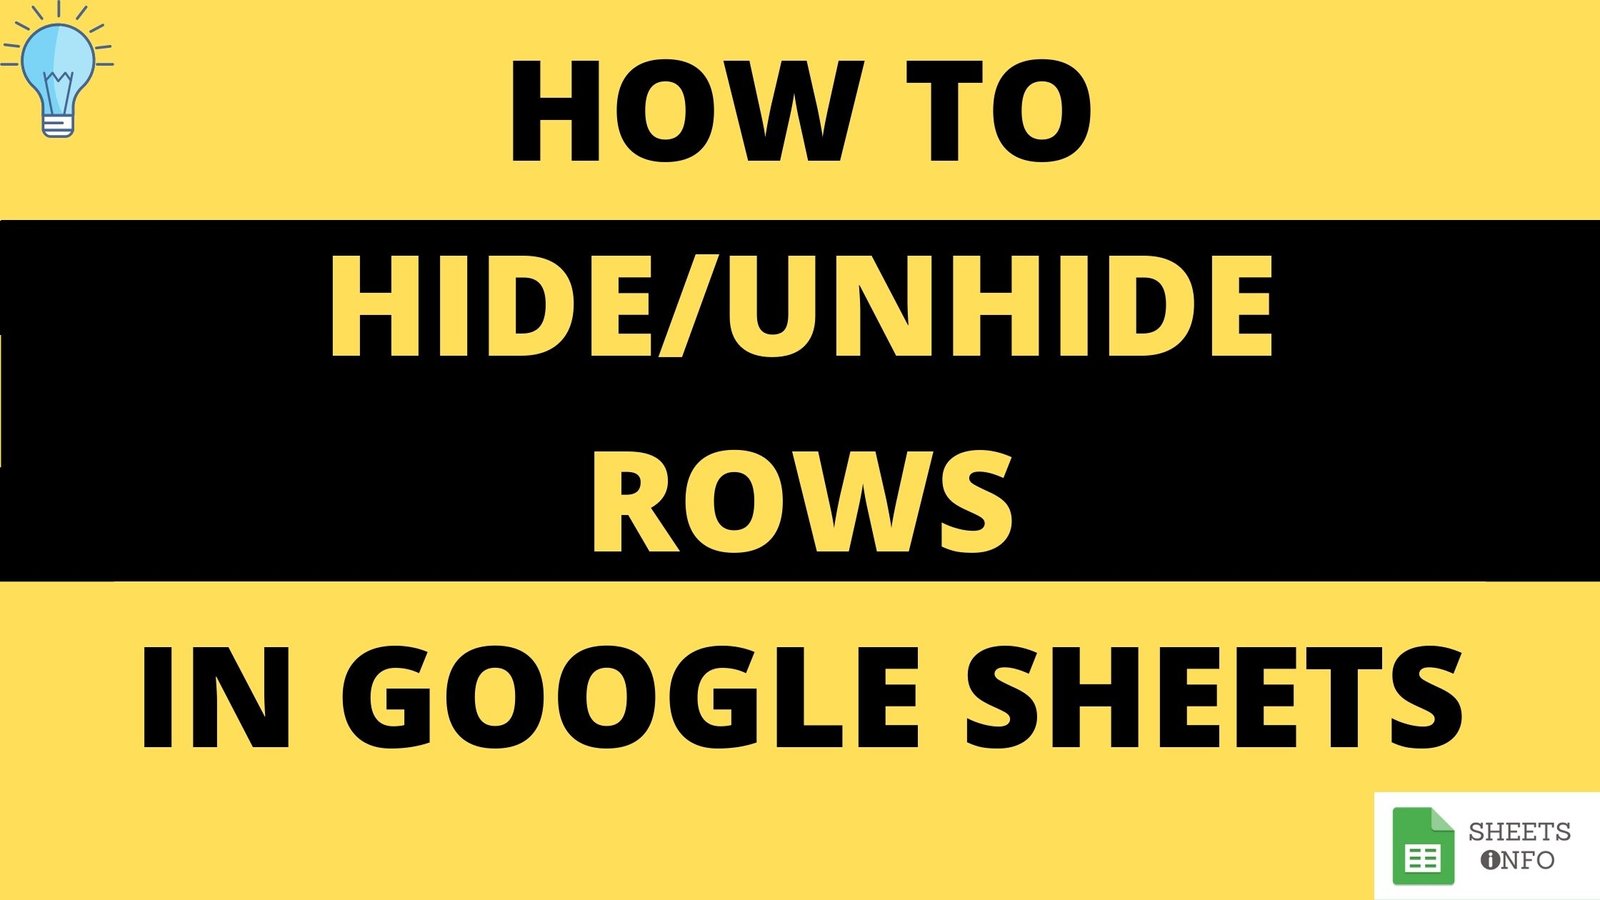 Show or hide Rows in Google Sheet